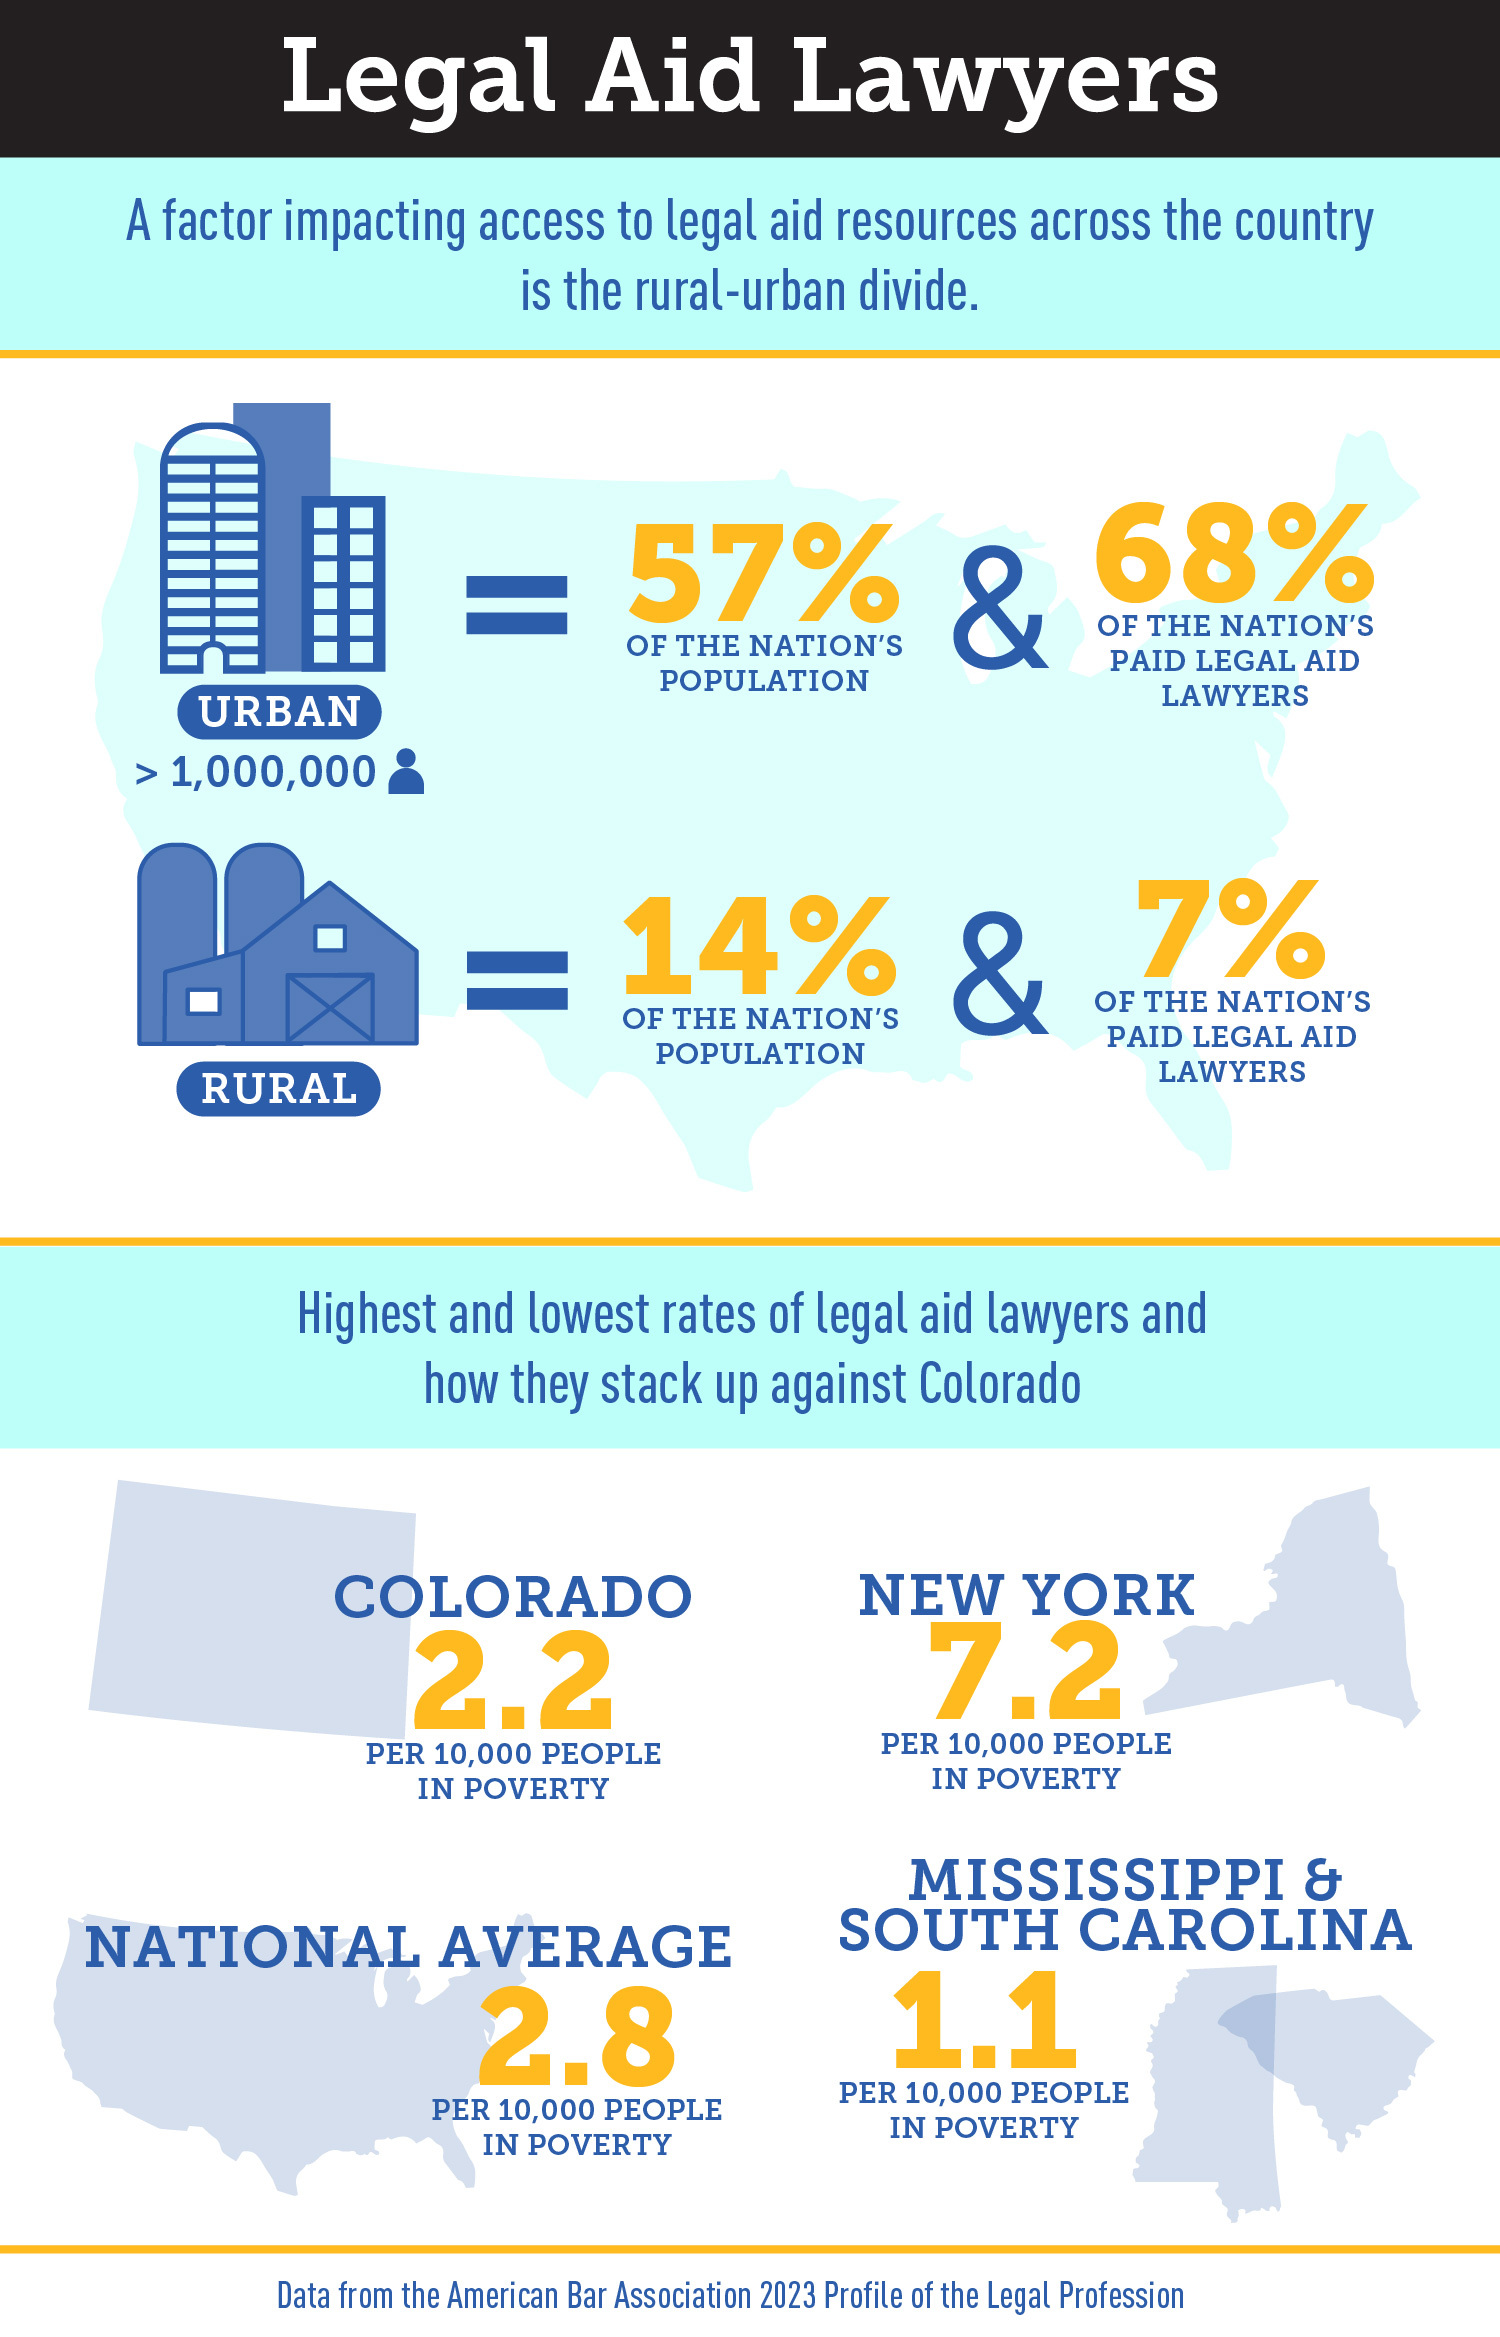 Infographic titled Legal Aid Lawyers, subtitled A factor impacting access to legal aid resources across the country is the rural-urban divide. Subtitle urban under a graphic of skyscrapers with urban defined as a metropolitan area of more than one million people. The percentage of the nation's population in urban areas is 57% and contains 68% of the nations paid legal aid lawyers. Subtitle rural under a picture of a barn. The percentage of the nation's population in rural areas is 14% and contains 7% of the nation's paid legal aid lawyers. Subtitle Highest and lowest rates of legal aid lawyers and how they stack up against Colorado. Picture of Colorado state outline with 2.2 legal aid lawyers per 10,000 people in poverty. Picture of New York state outline with 7.2 legal aid lawyers per 10,000 people in poverty. Picture of the United States country outline with 2.8 legal aid lawyers per 10,000 people in poverty. Pictures of the Mississippi and South Carolina state outlines with 1.1 legal aid lawyers per 10,000 people in poverty. 